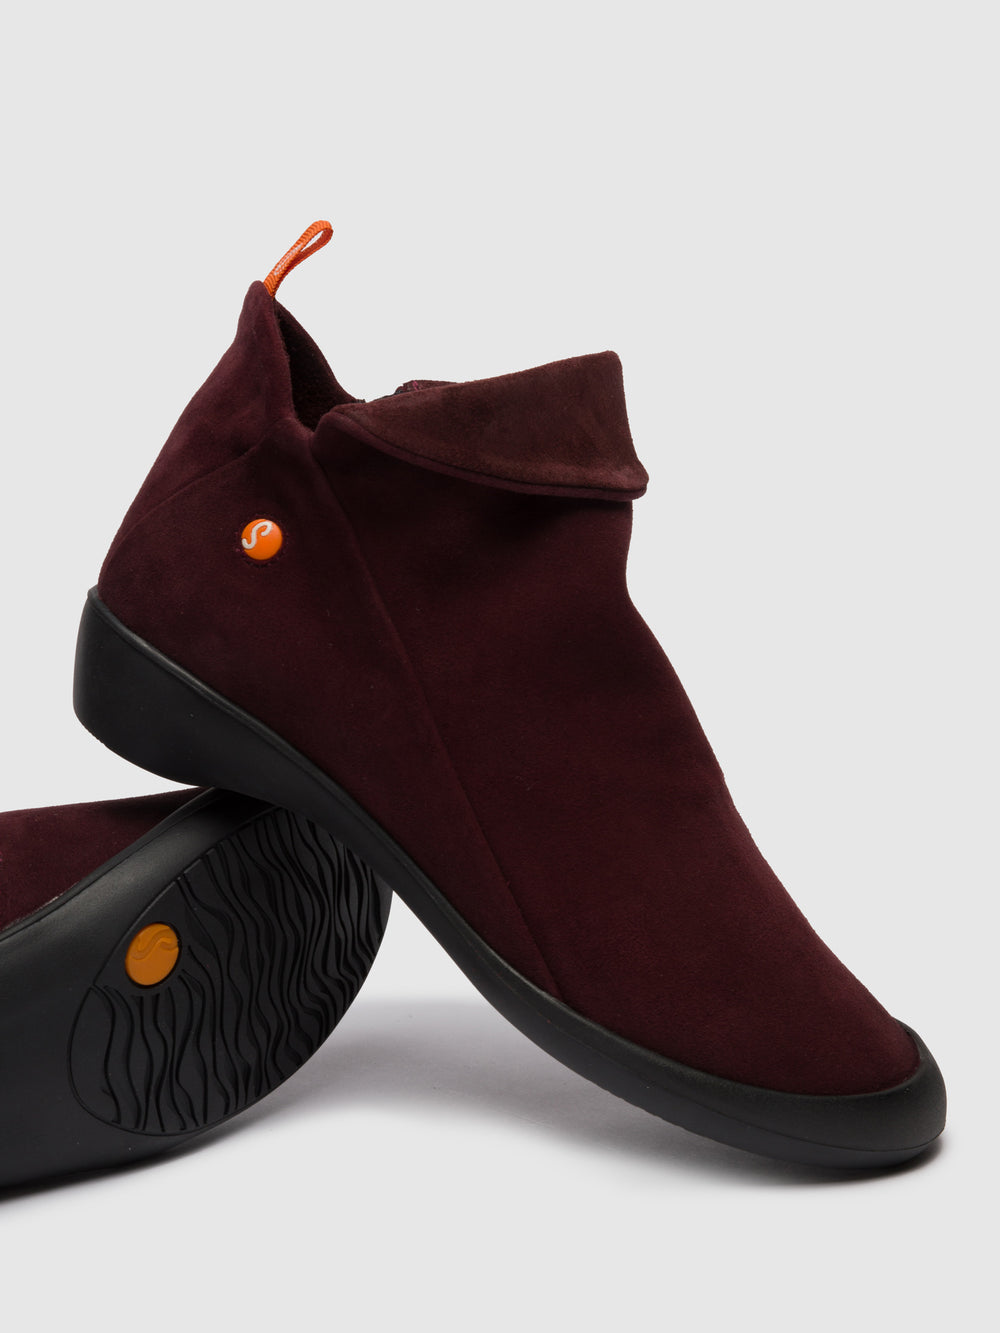 Zip Up Ankle Boots FARAH WINE